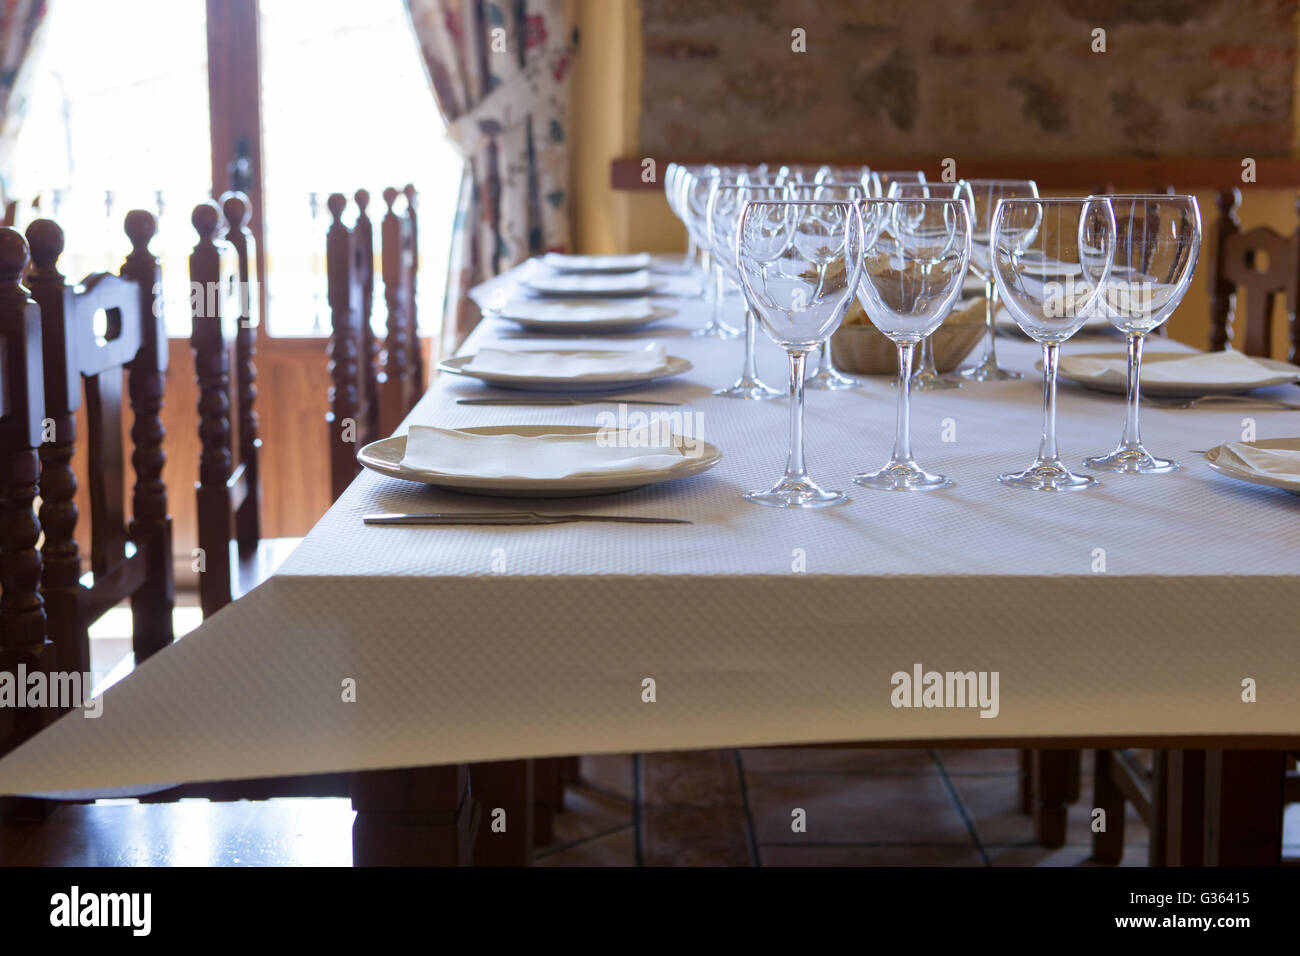 Table ready and waiting for the guests to arrive at a rustic restaurant Stock Photo